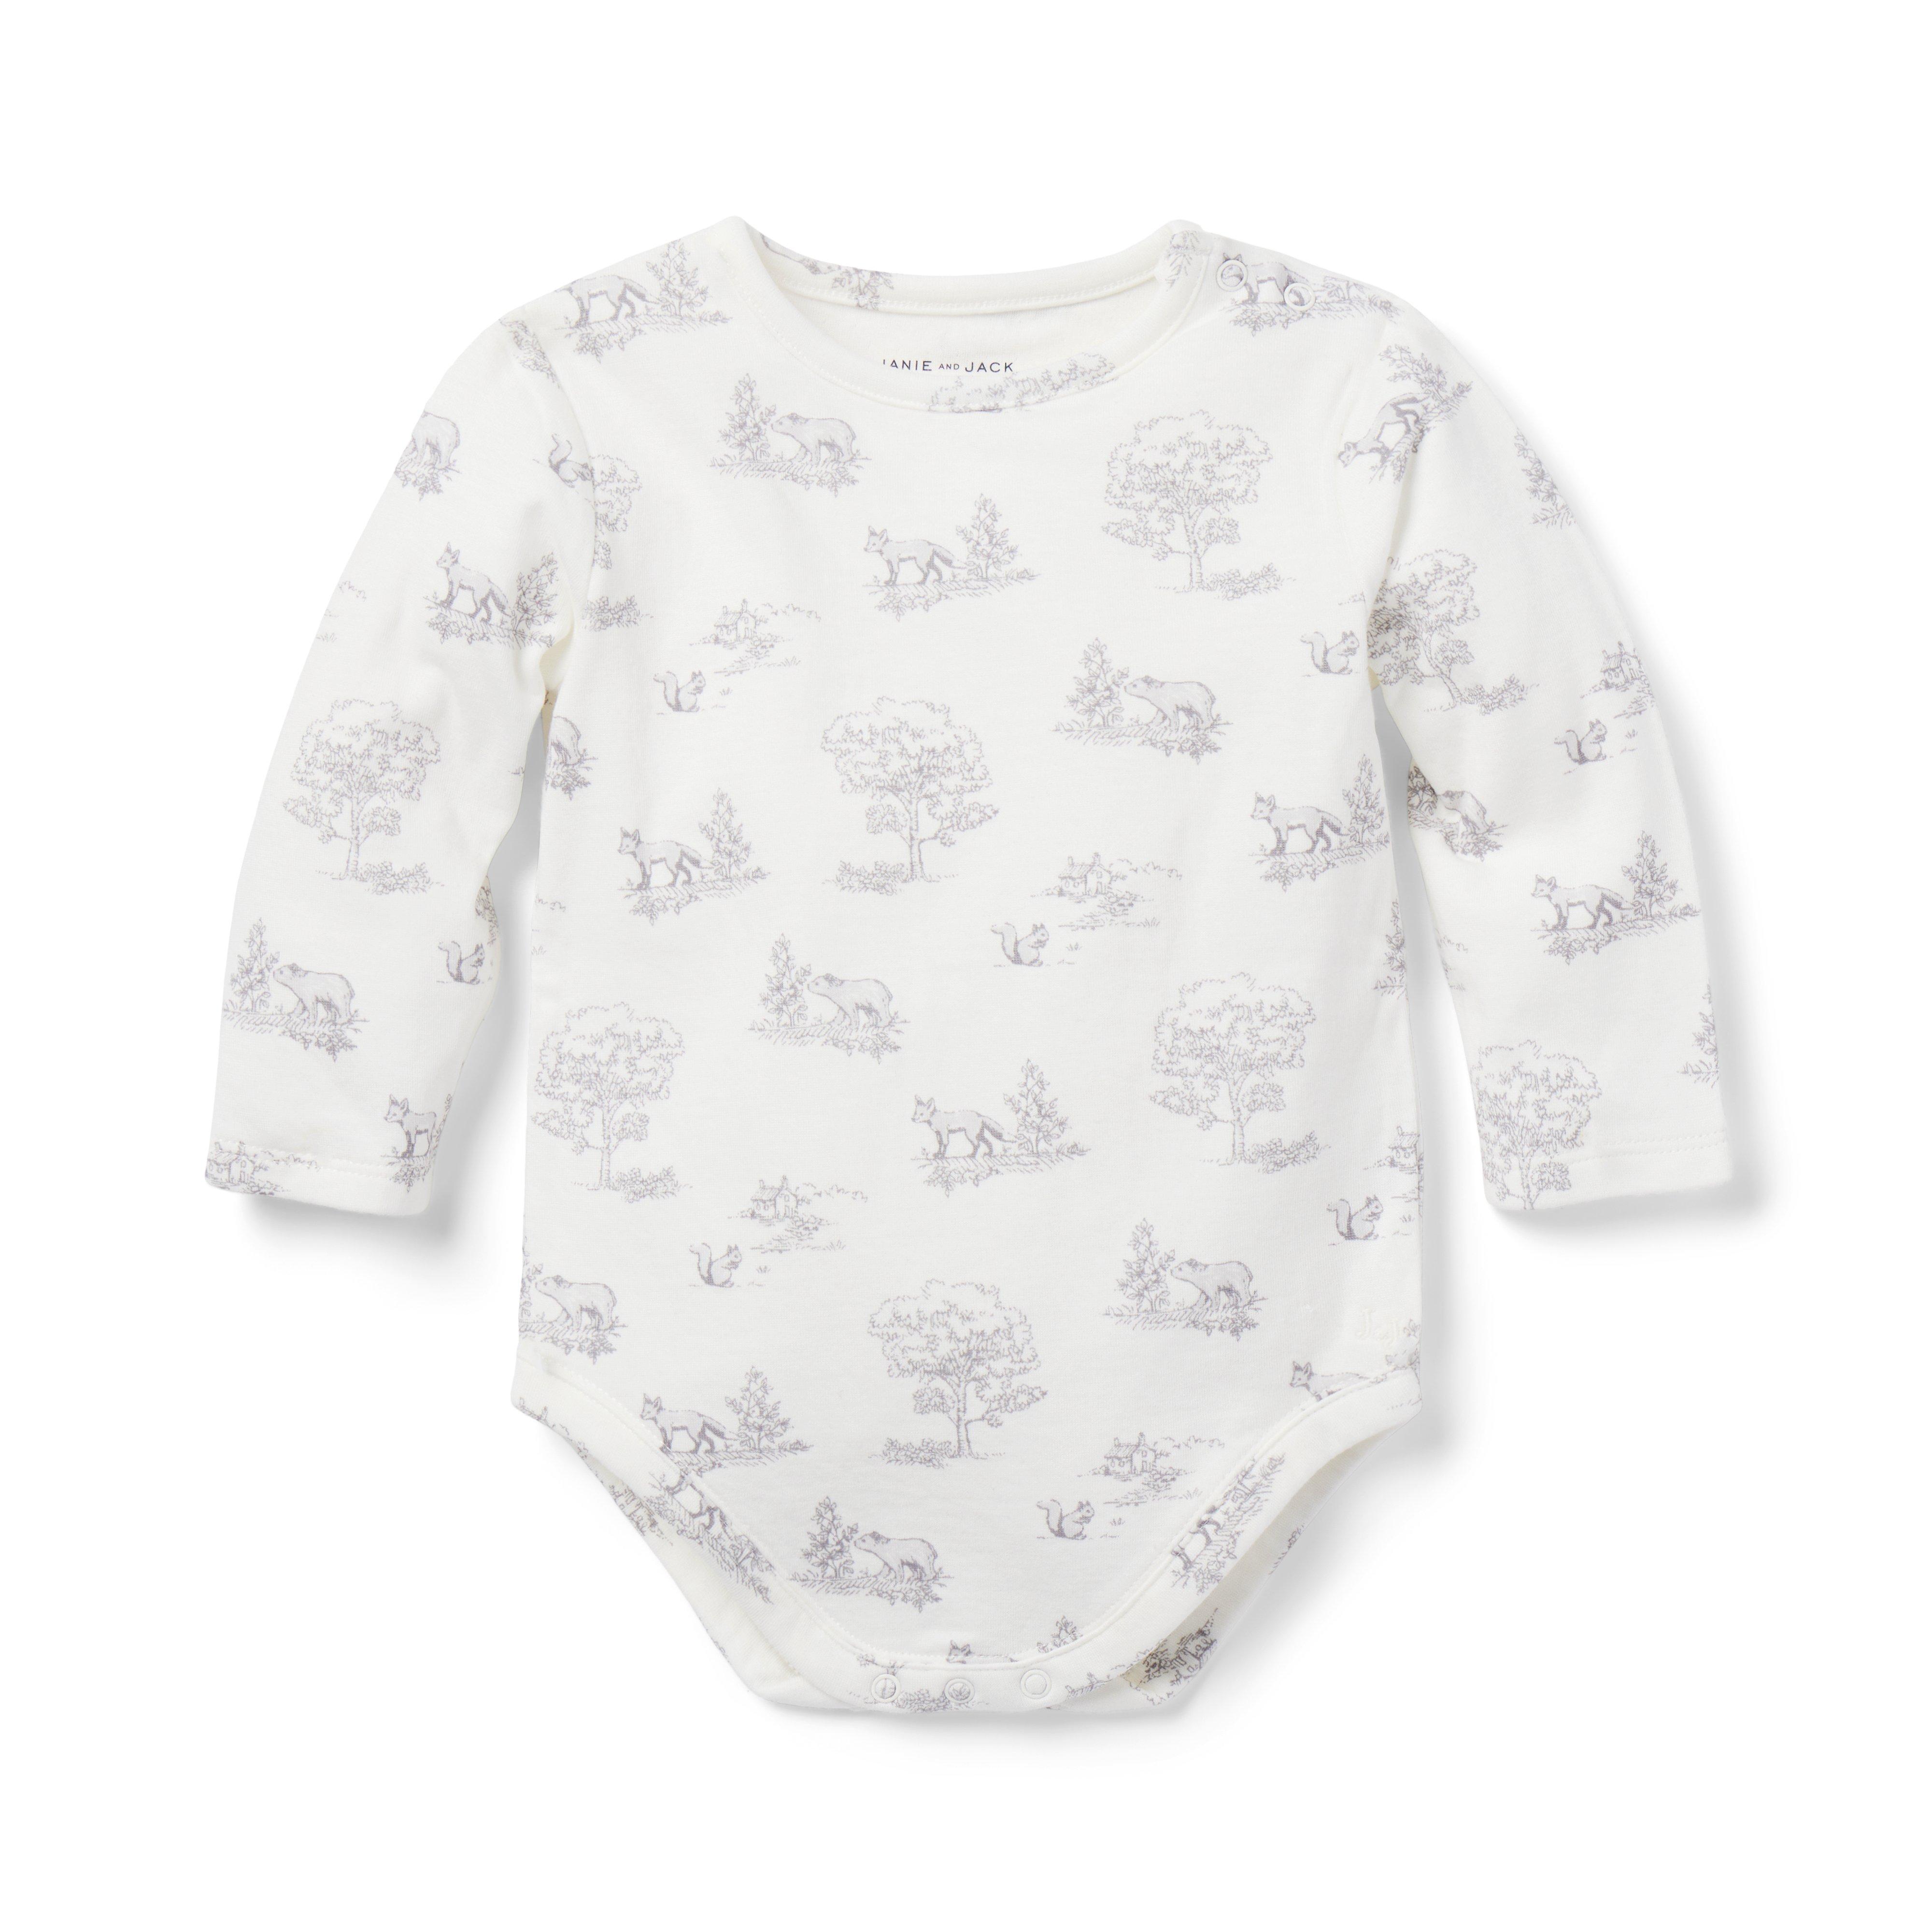 Newborn Baby Girl Tops & Bodysuits at Janie and Jack